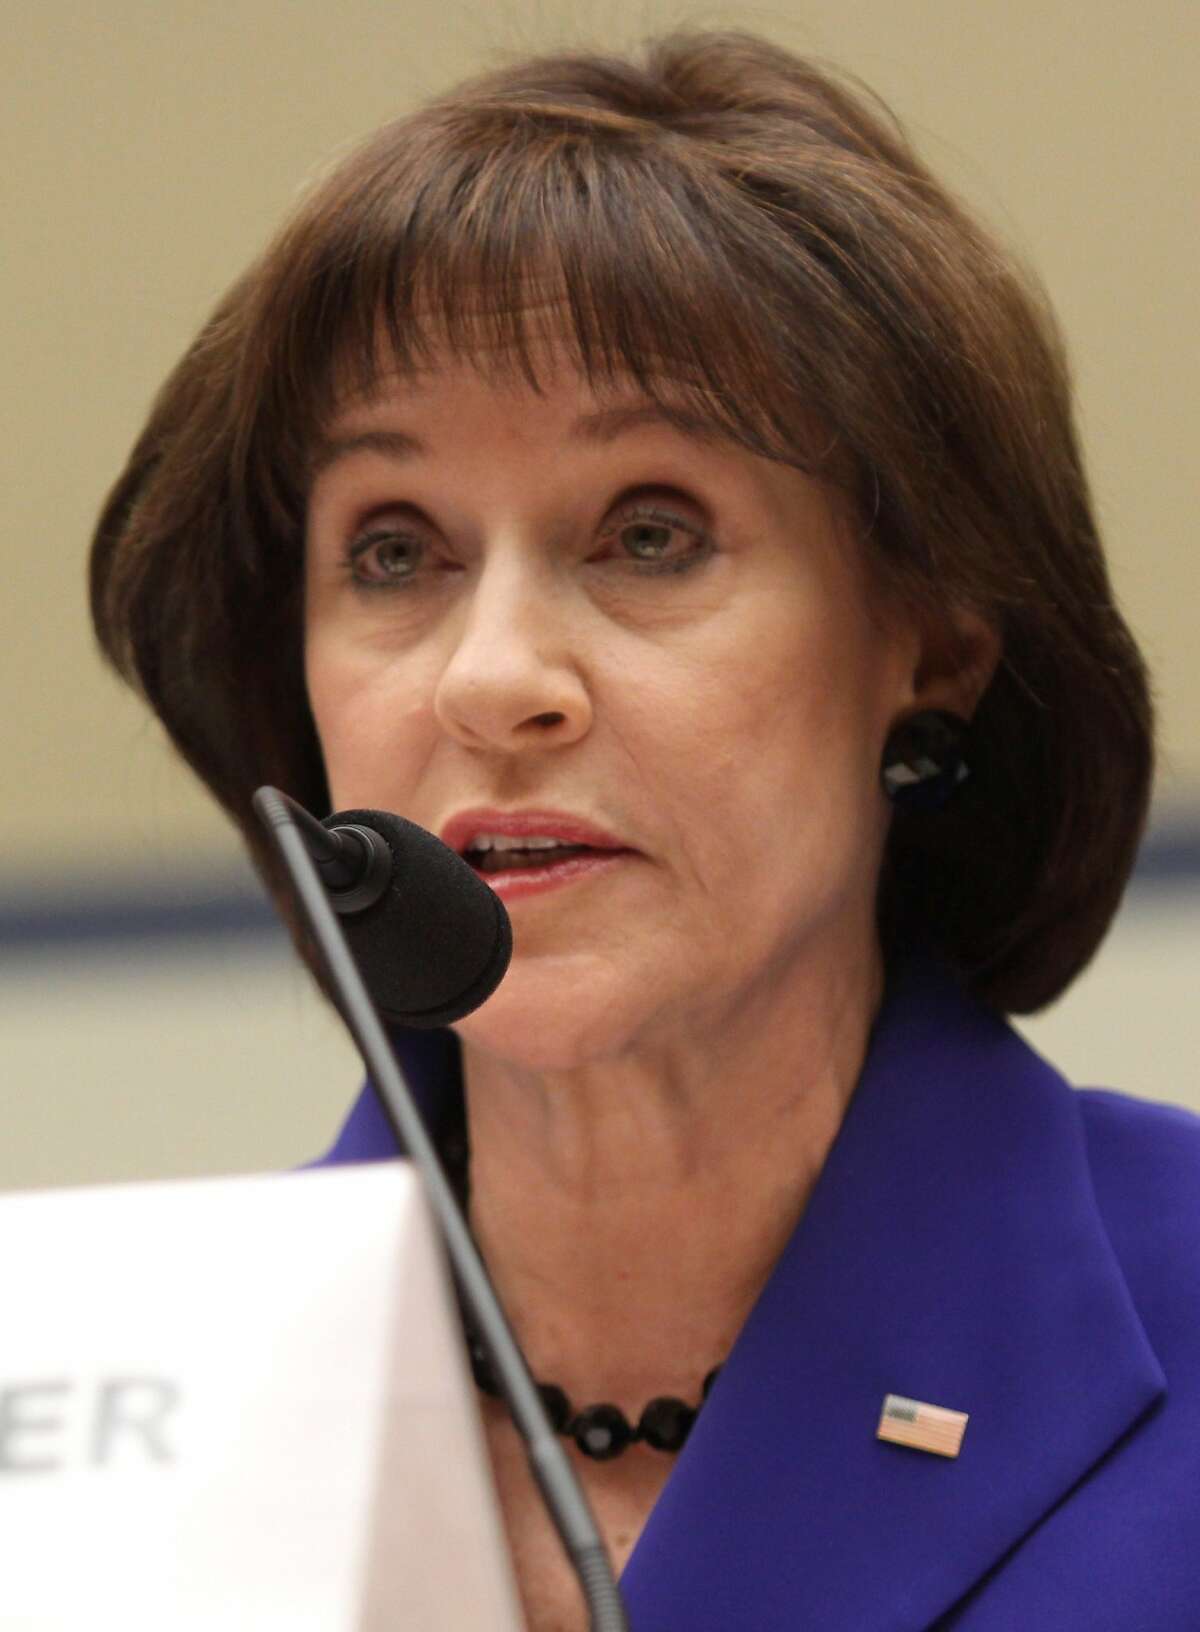 Former Internal Revenue Service (IRS) official Lois Lerner speaks on Capitol Hill in Washington, Wednesday, March 5, 2014, during the House Oversight and Government Reform Committee hearing on the the agency's targeting of tea party groups, where she invoked her constitutional right not to incriminate herself. (AP Photo/Lauren Victoria Burke)